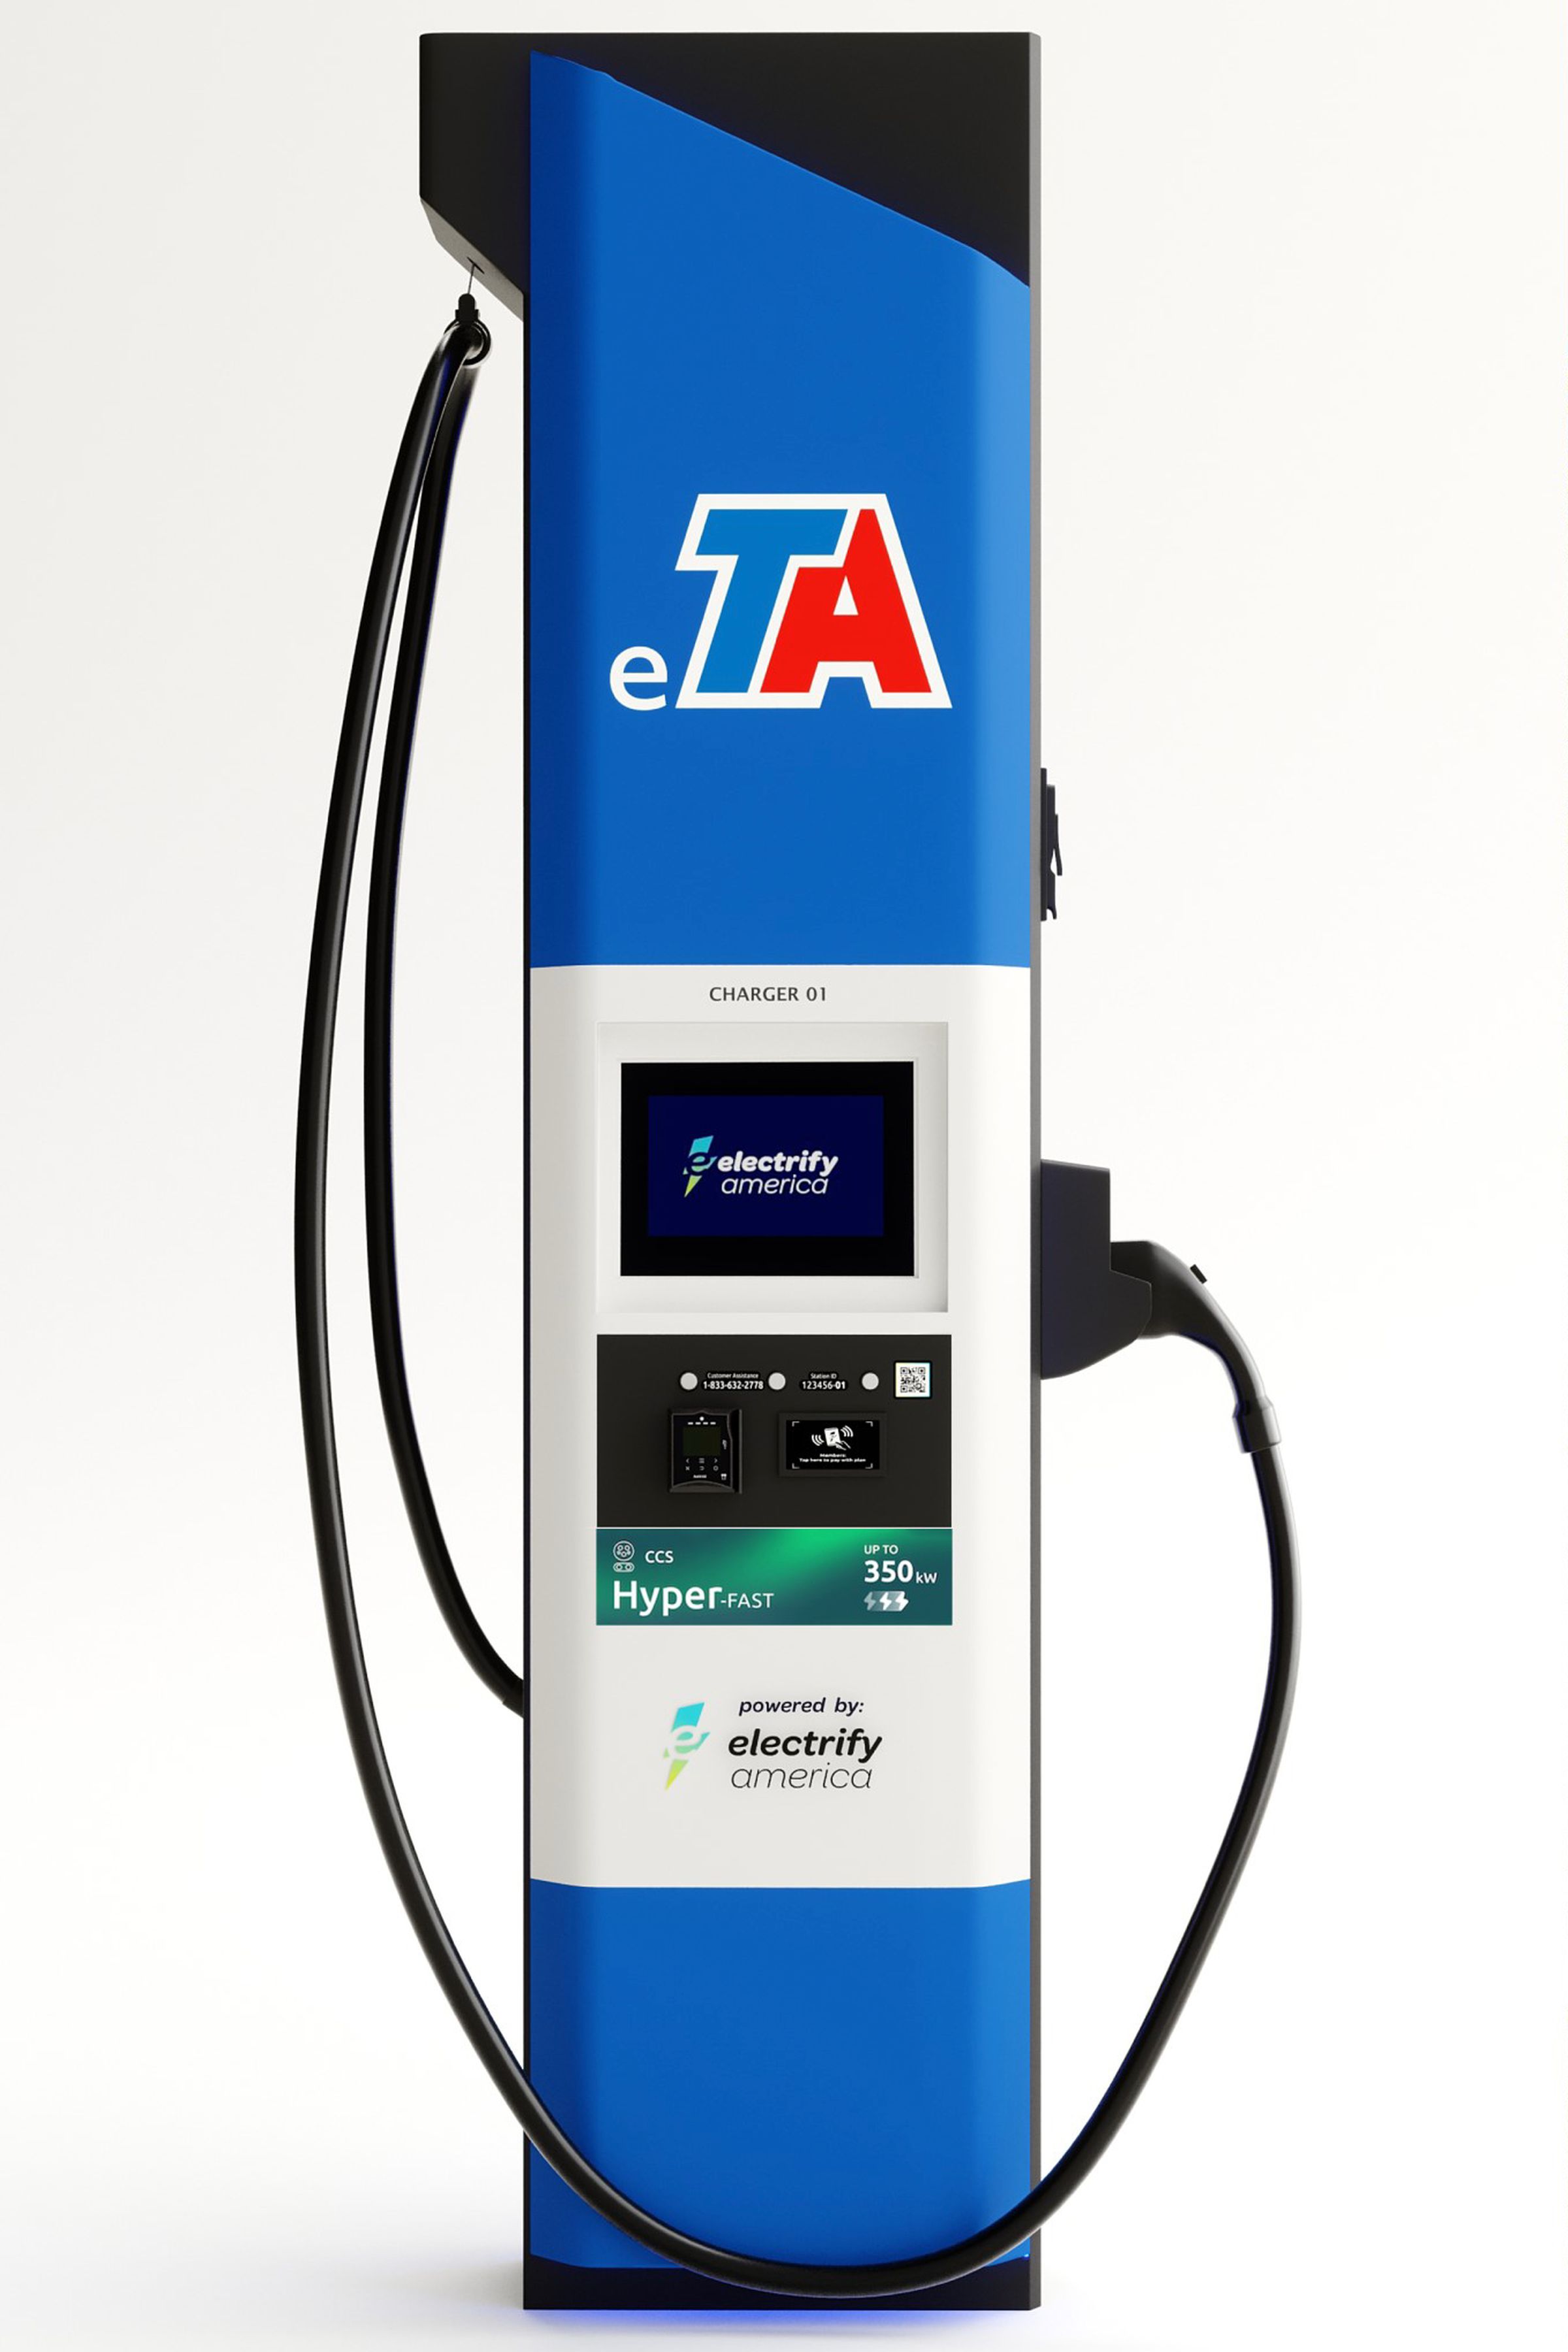 TA is putting its logo at the top of Electrify America’s latest fast charging hardware.